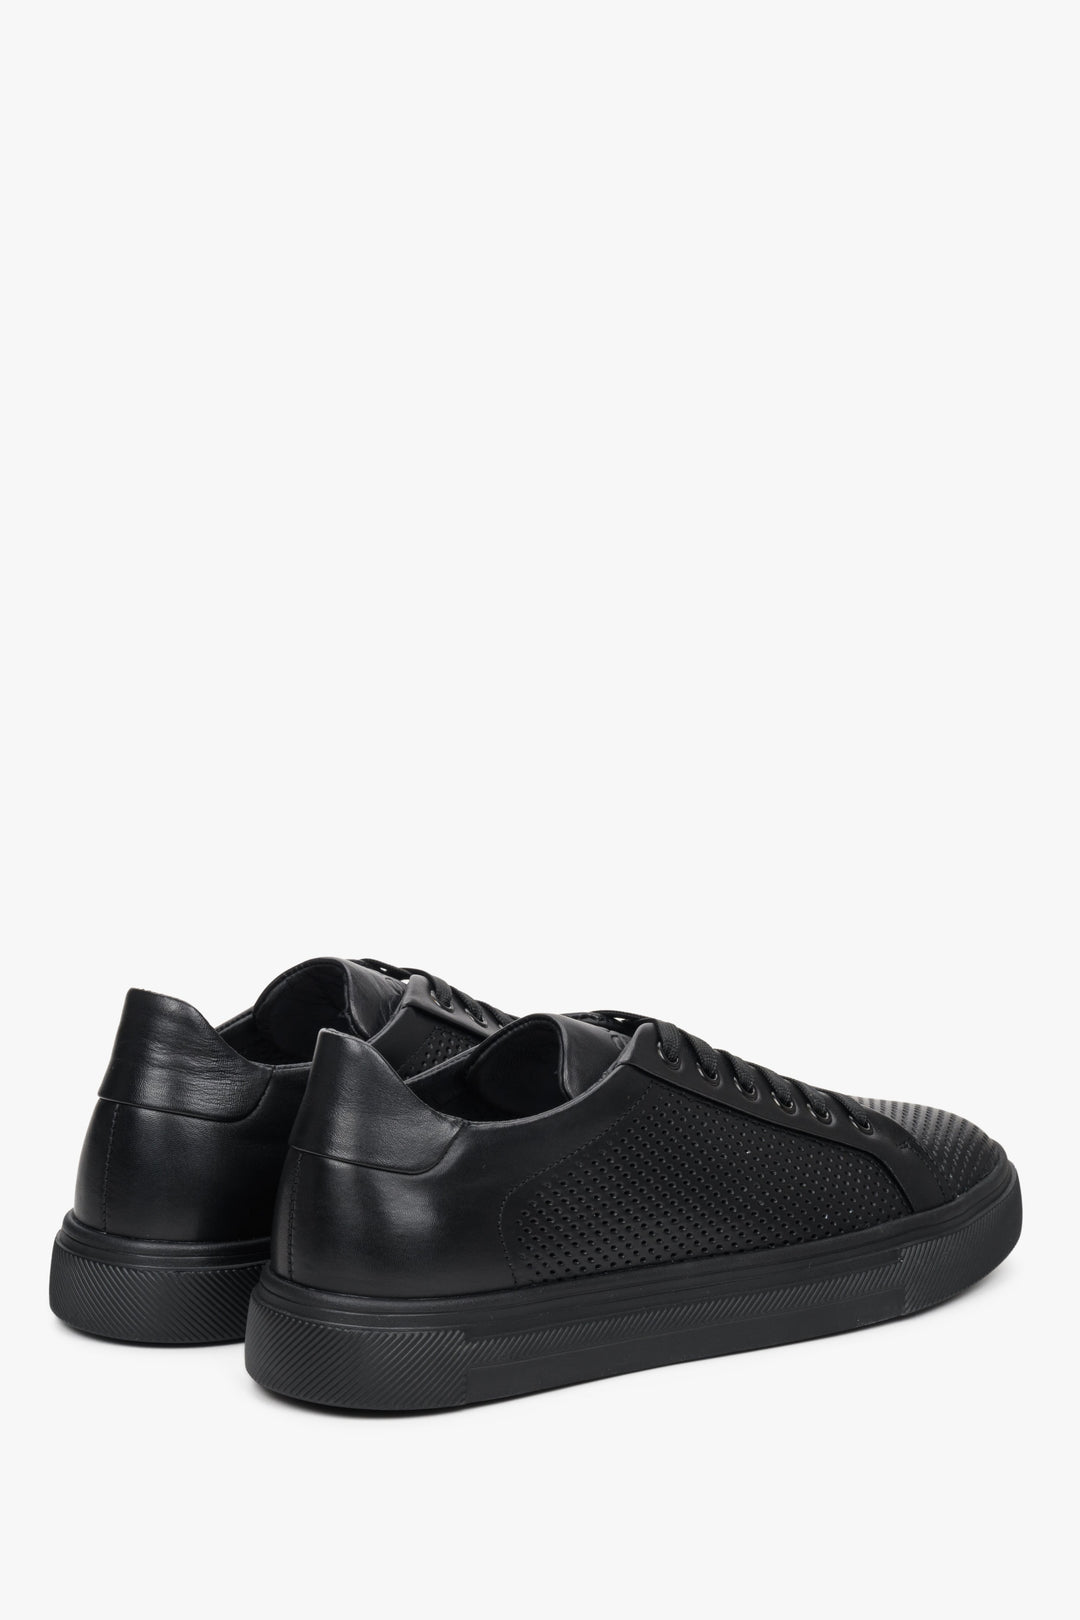 Men's black sneakers made of genuine leather with perforations - close-up of the heel and side seam of the shoe.